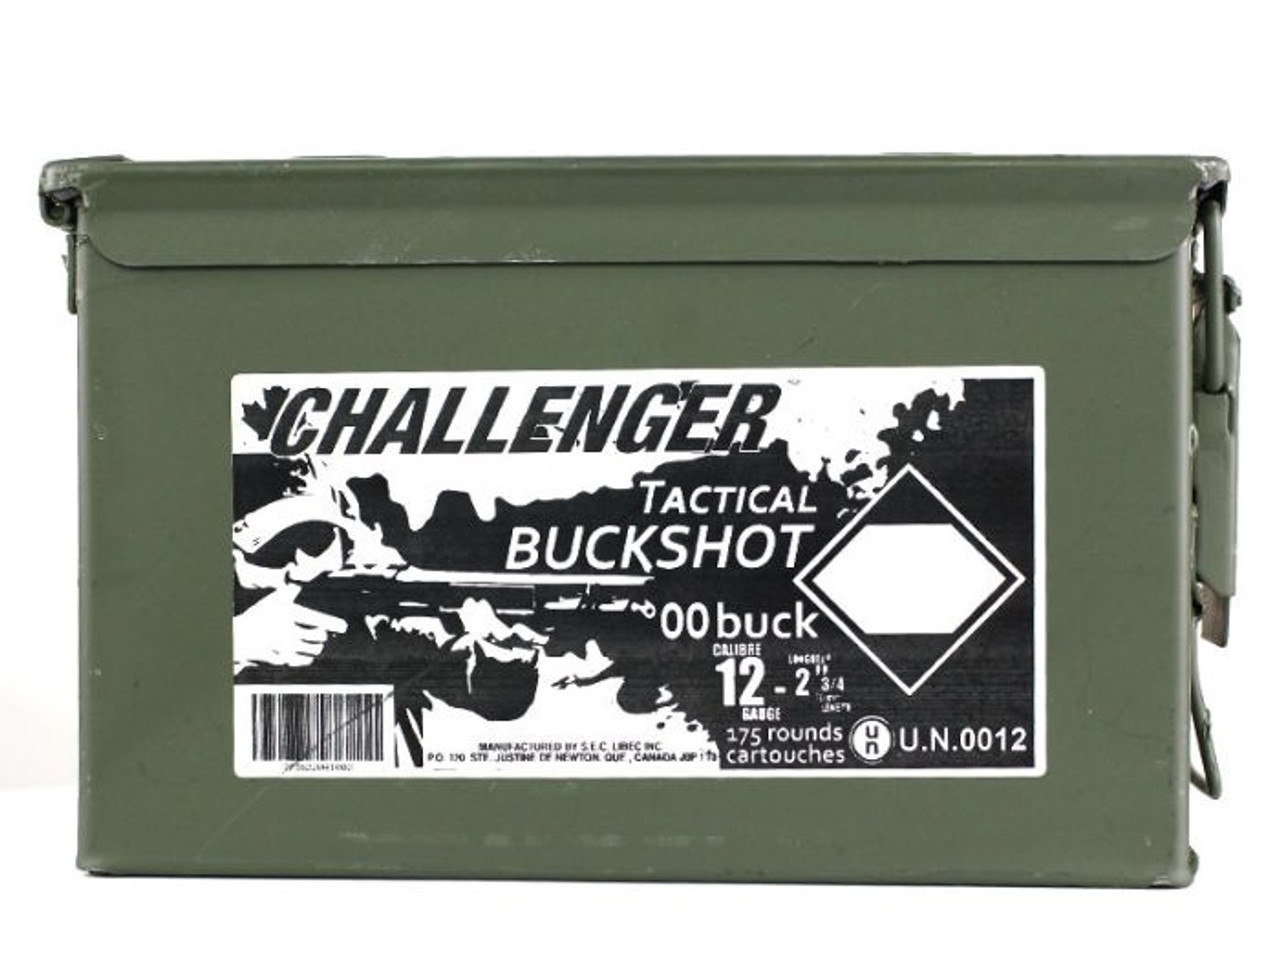 Challenger Magnum 00 Buck

Challenger 12 Gauge 00 Buck is perfect for heavy volume shooting - packed with 9 lead pellets in a convenient to carry and reusable metal ammo can. 

Specifications:

Rounds Per Can: 175 Rounds (7 boxes of 25 rounds)
Shot Type: Magnum Buckshot
Shot Size: 00 (9 pellets)
Length: 2-3/4"
Velocity: 1,350 fps